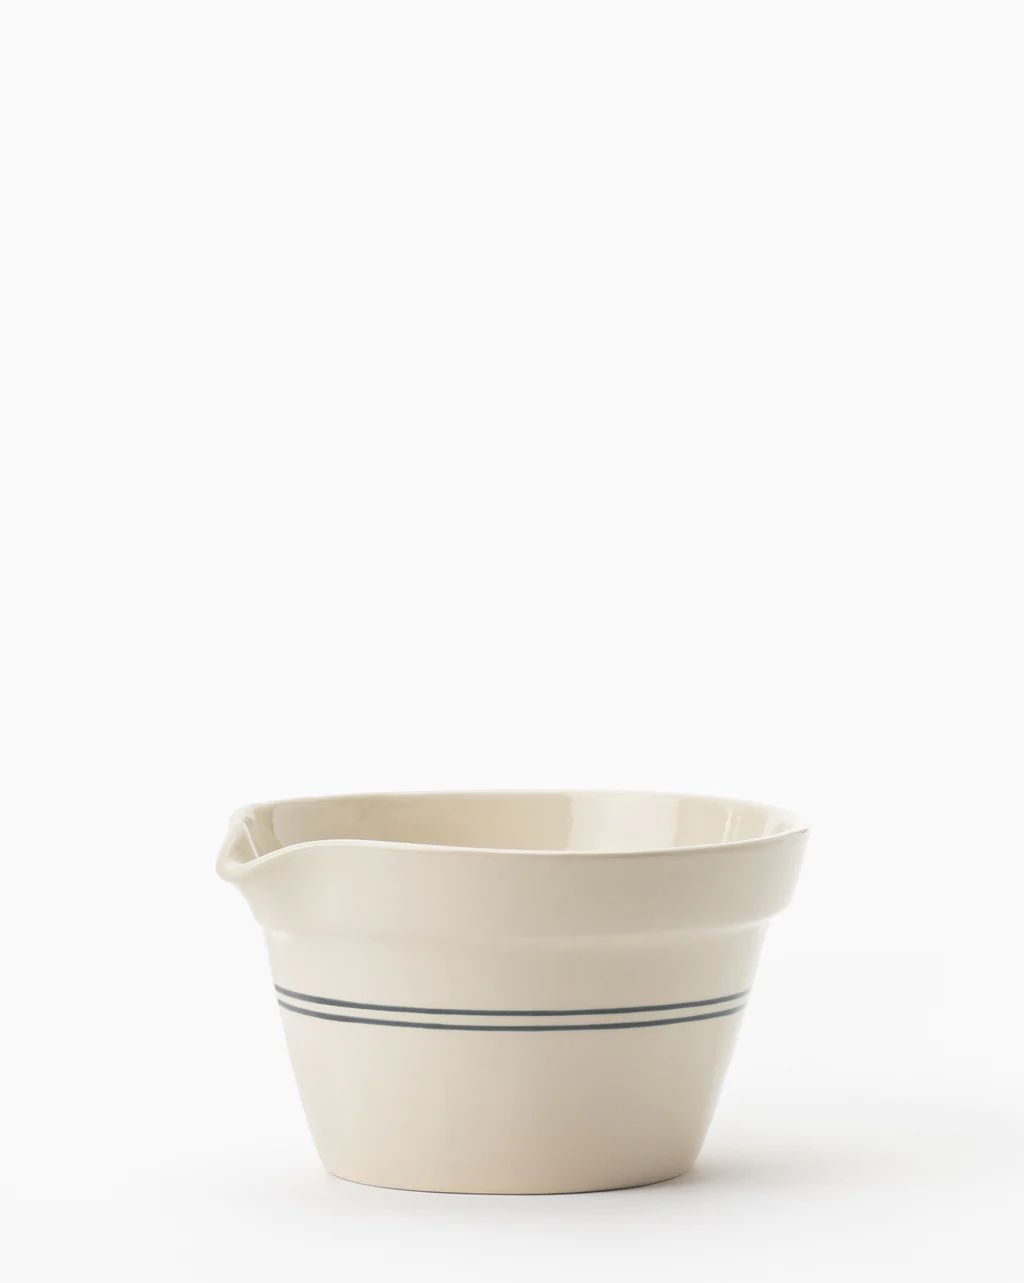 Everett Mixing Bowl | McGee & Co.